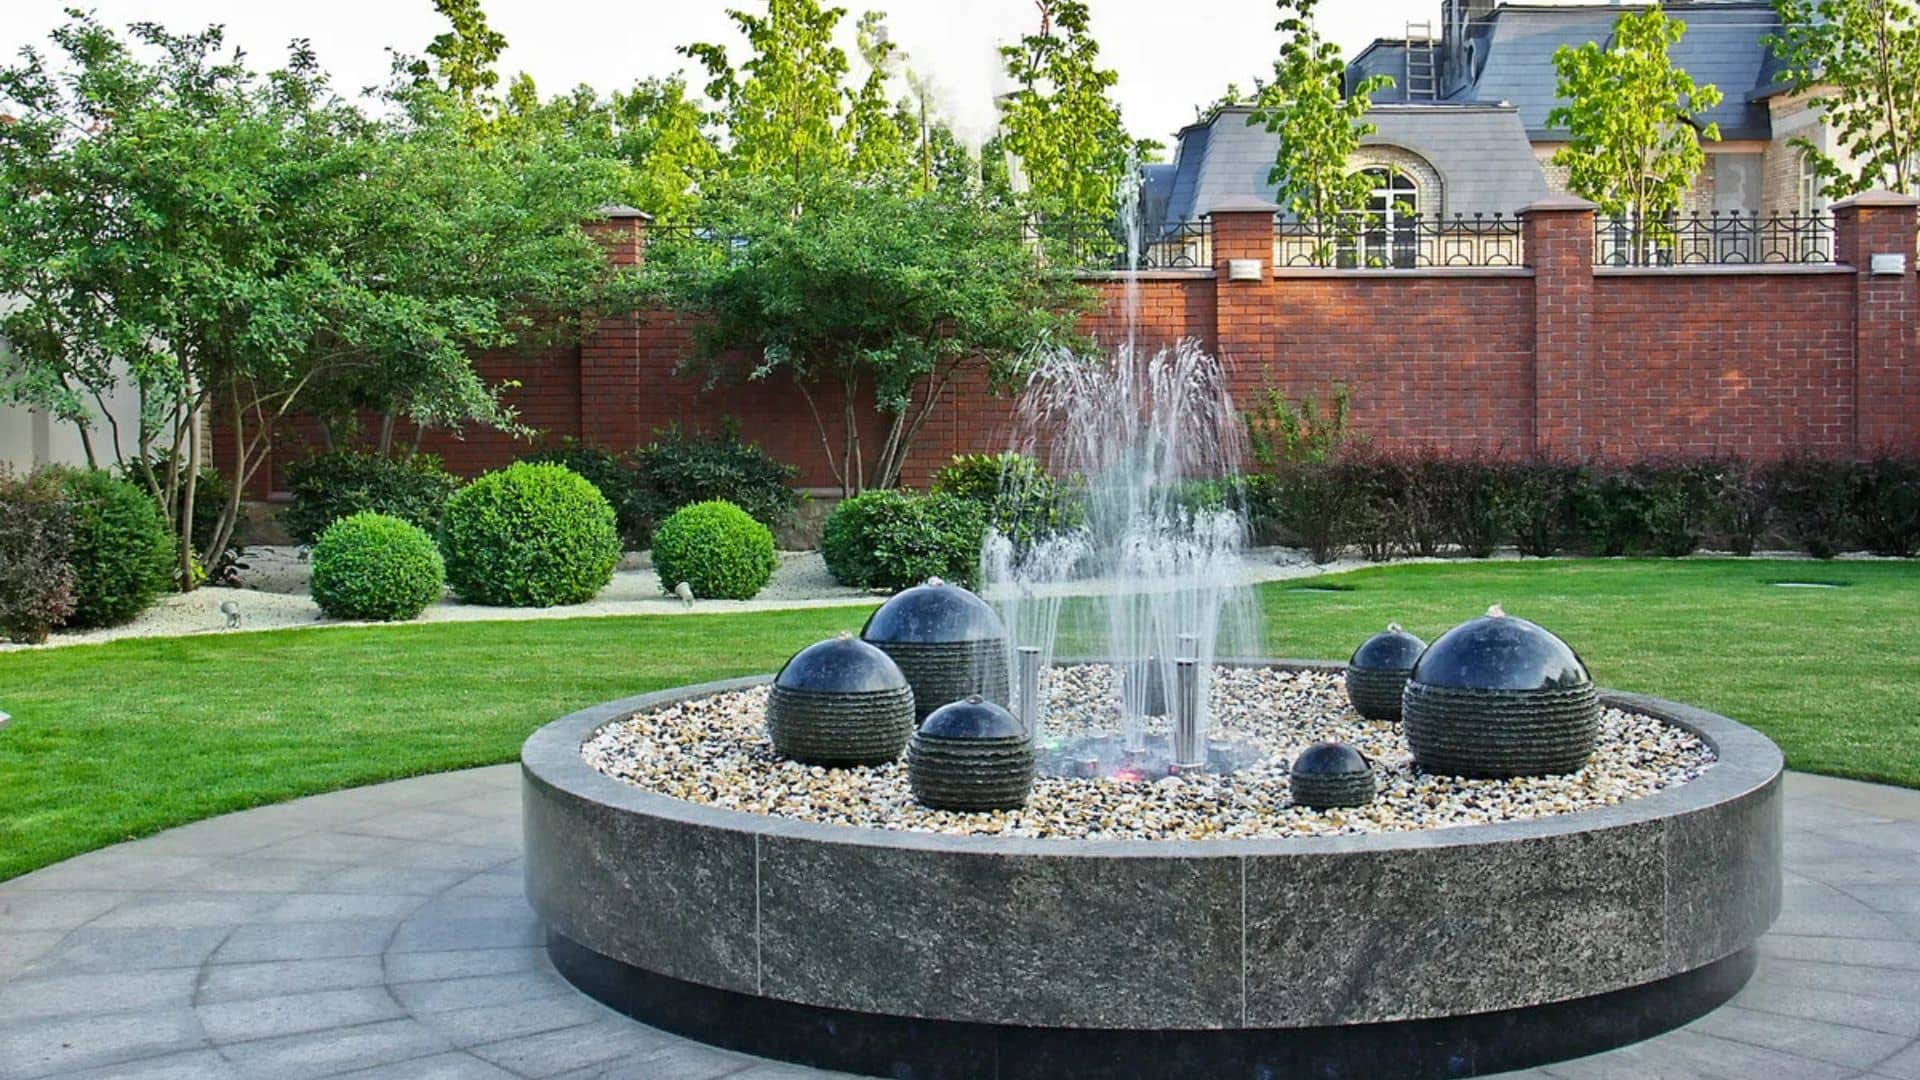 Step-by-Step guide to new Water Features installation services